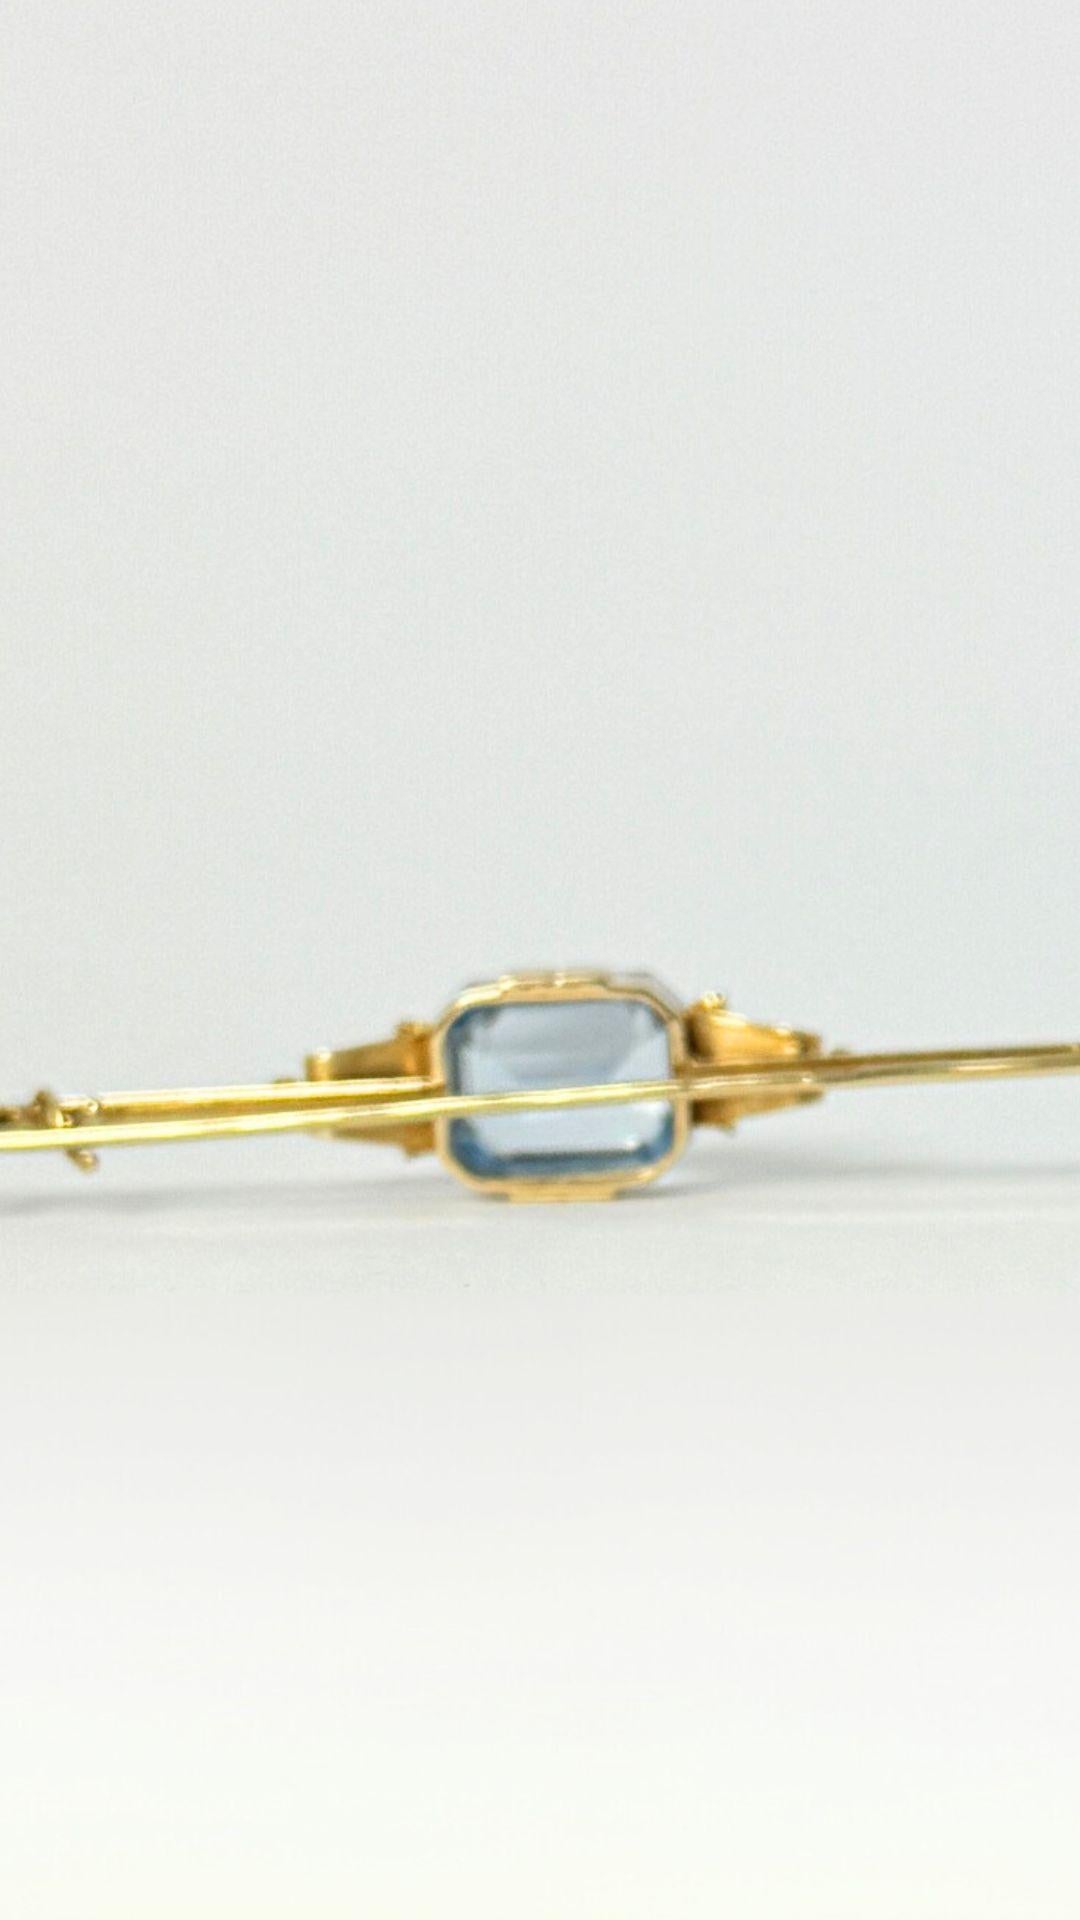 Women's European vintage pin 14 carat gold with blue topaz For Sale